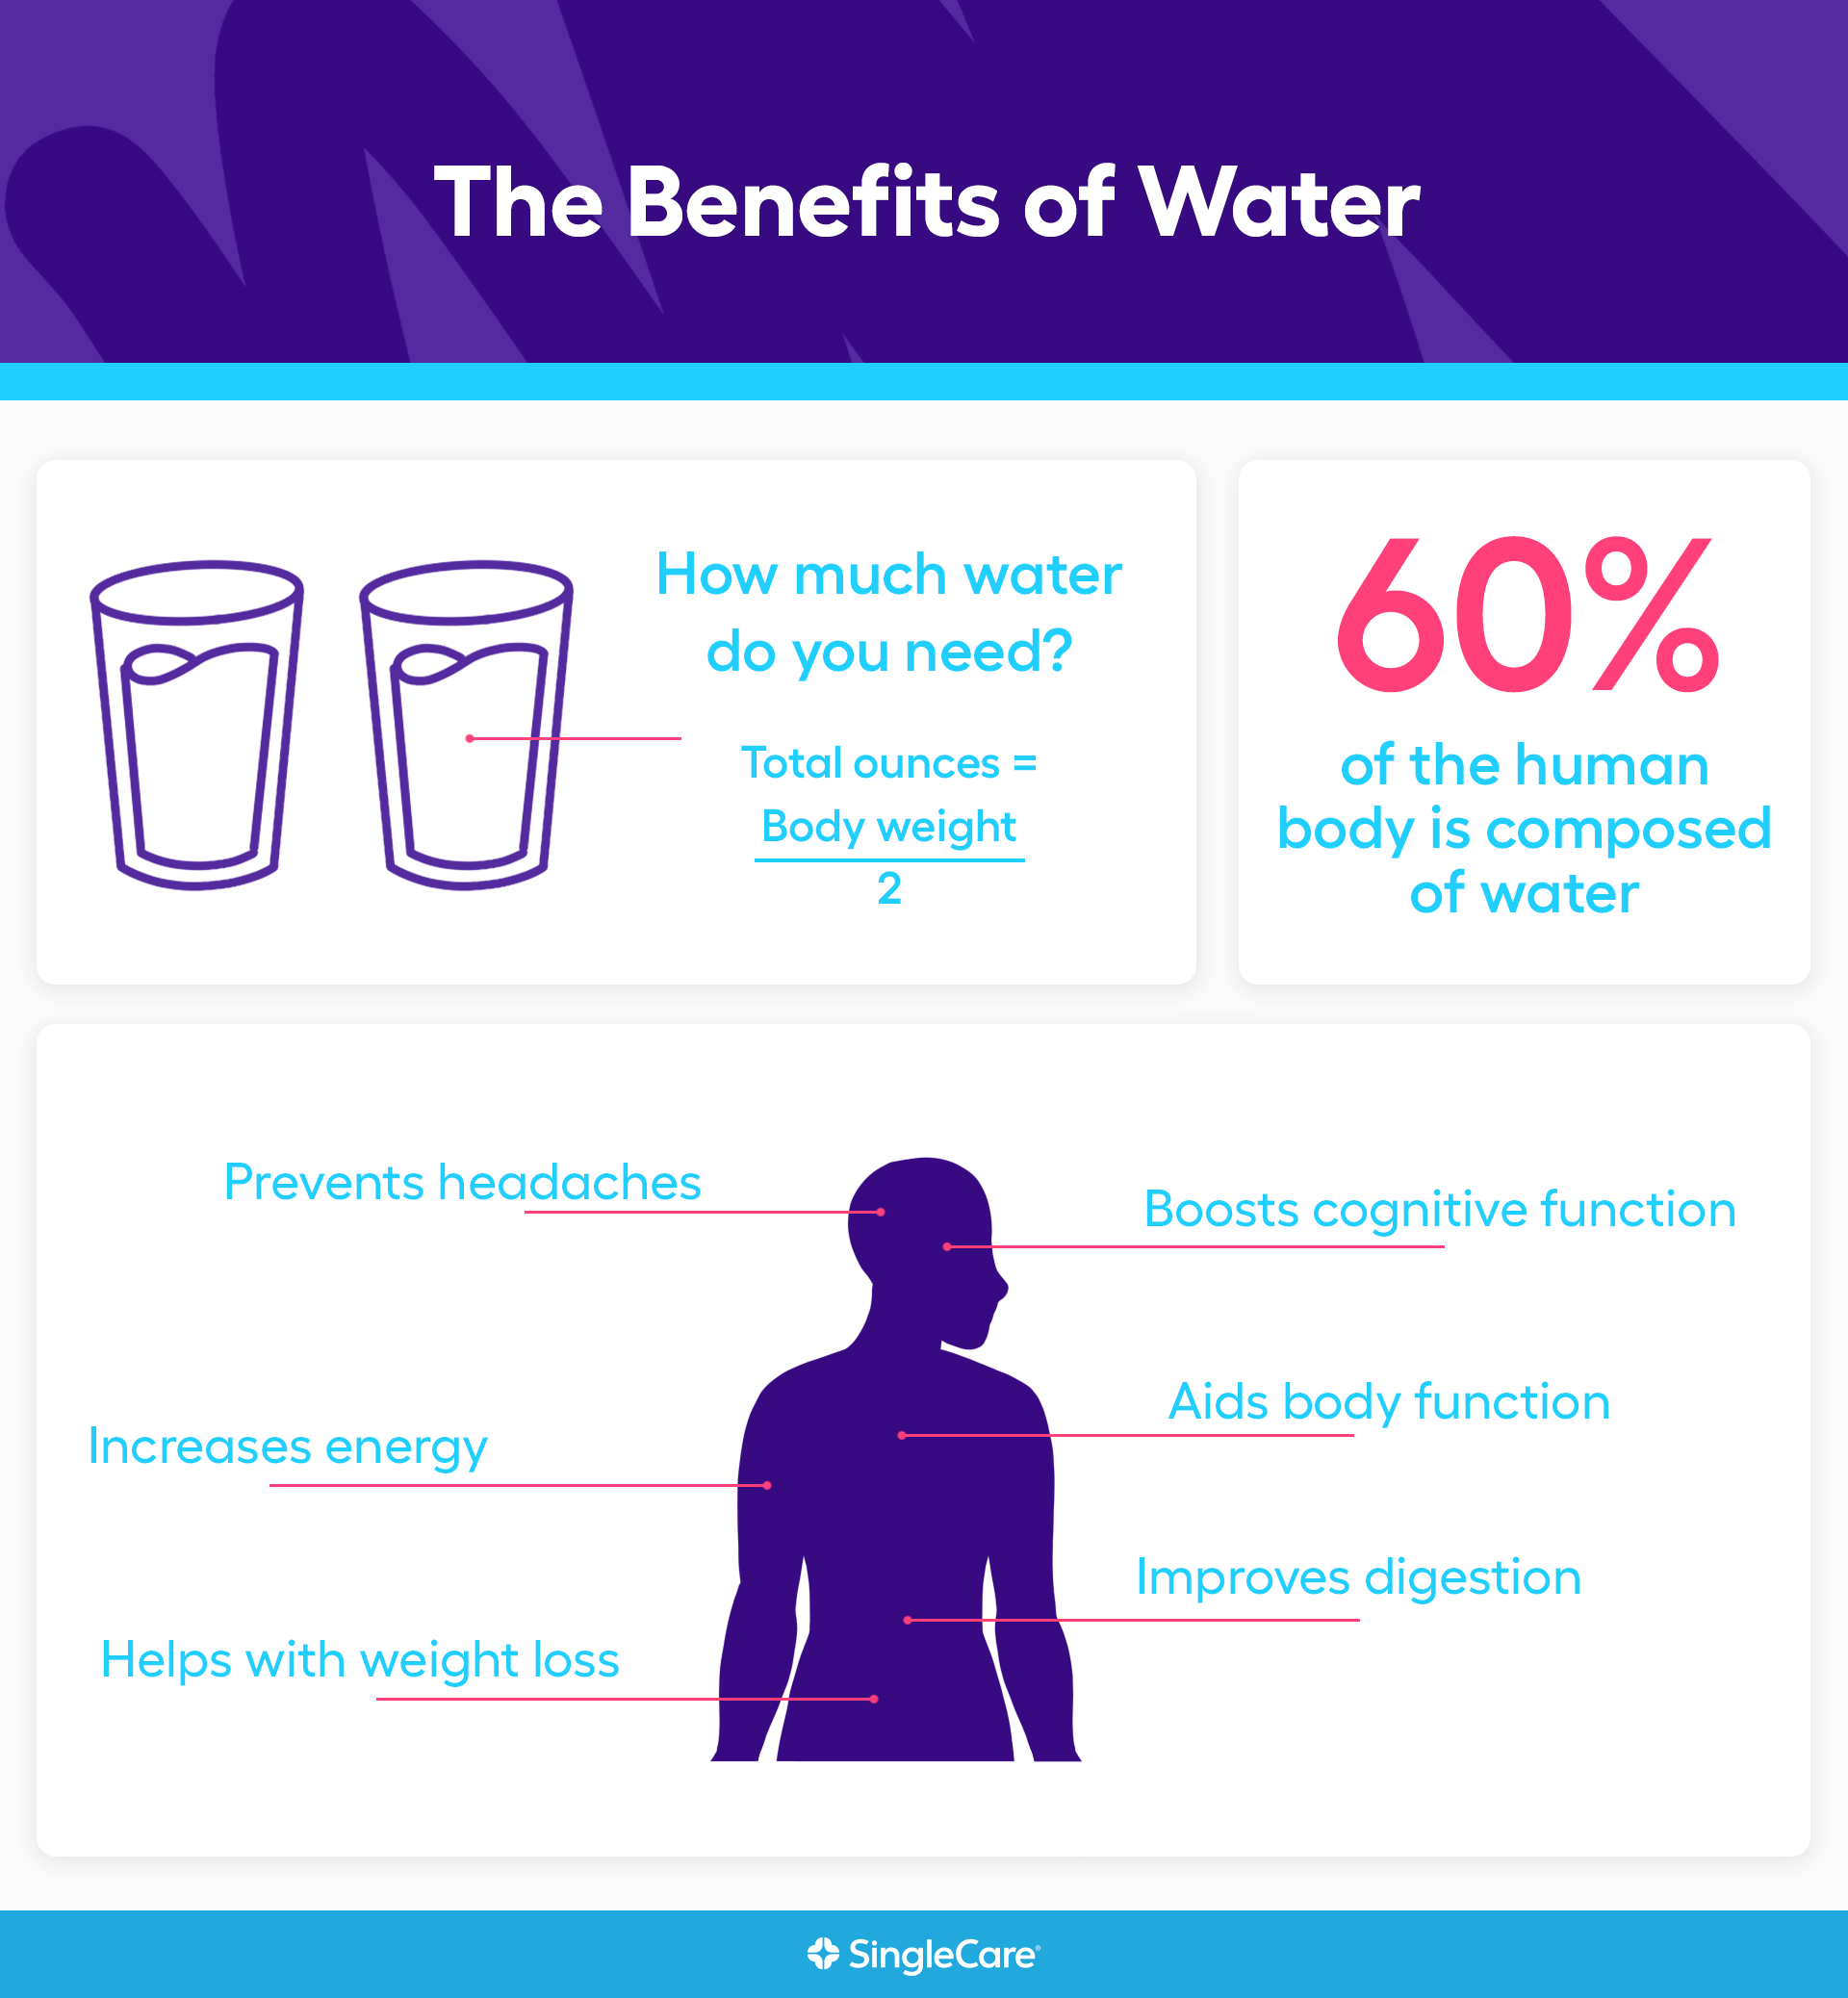 https://www.singlecare.com/blog/wp-content/uploads/2021/03/033121_Benefits_of_water_infographic.png